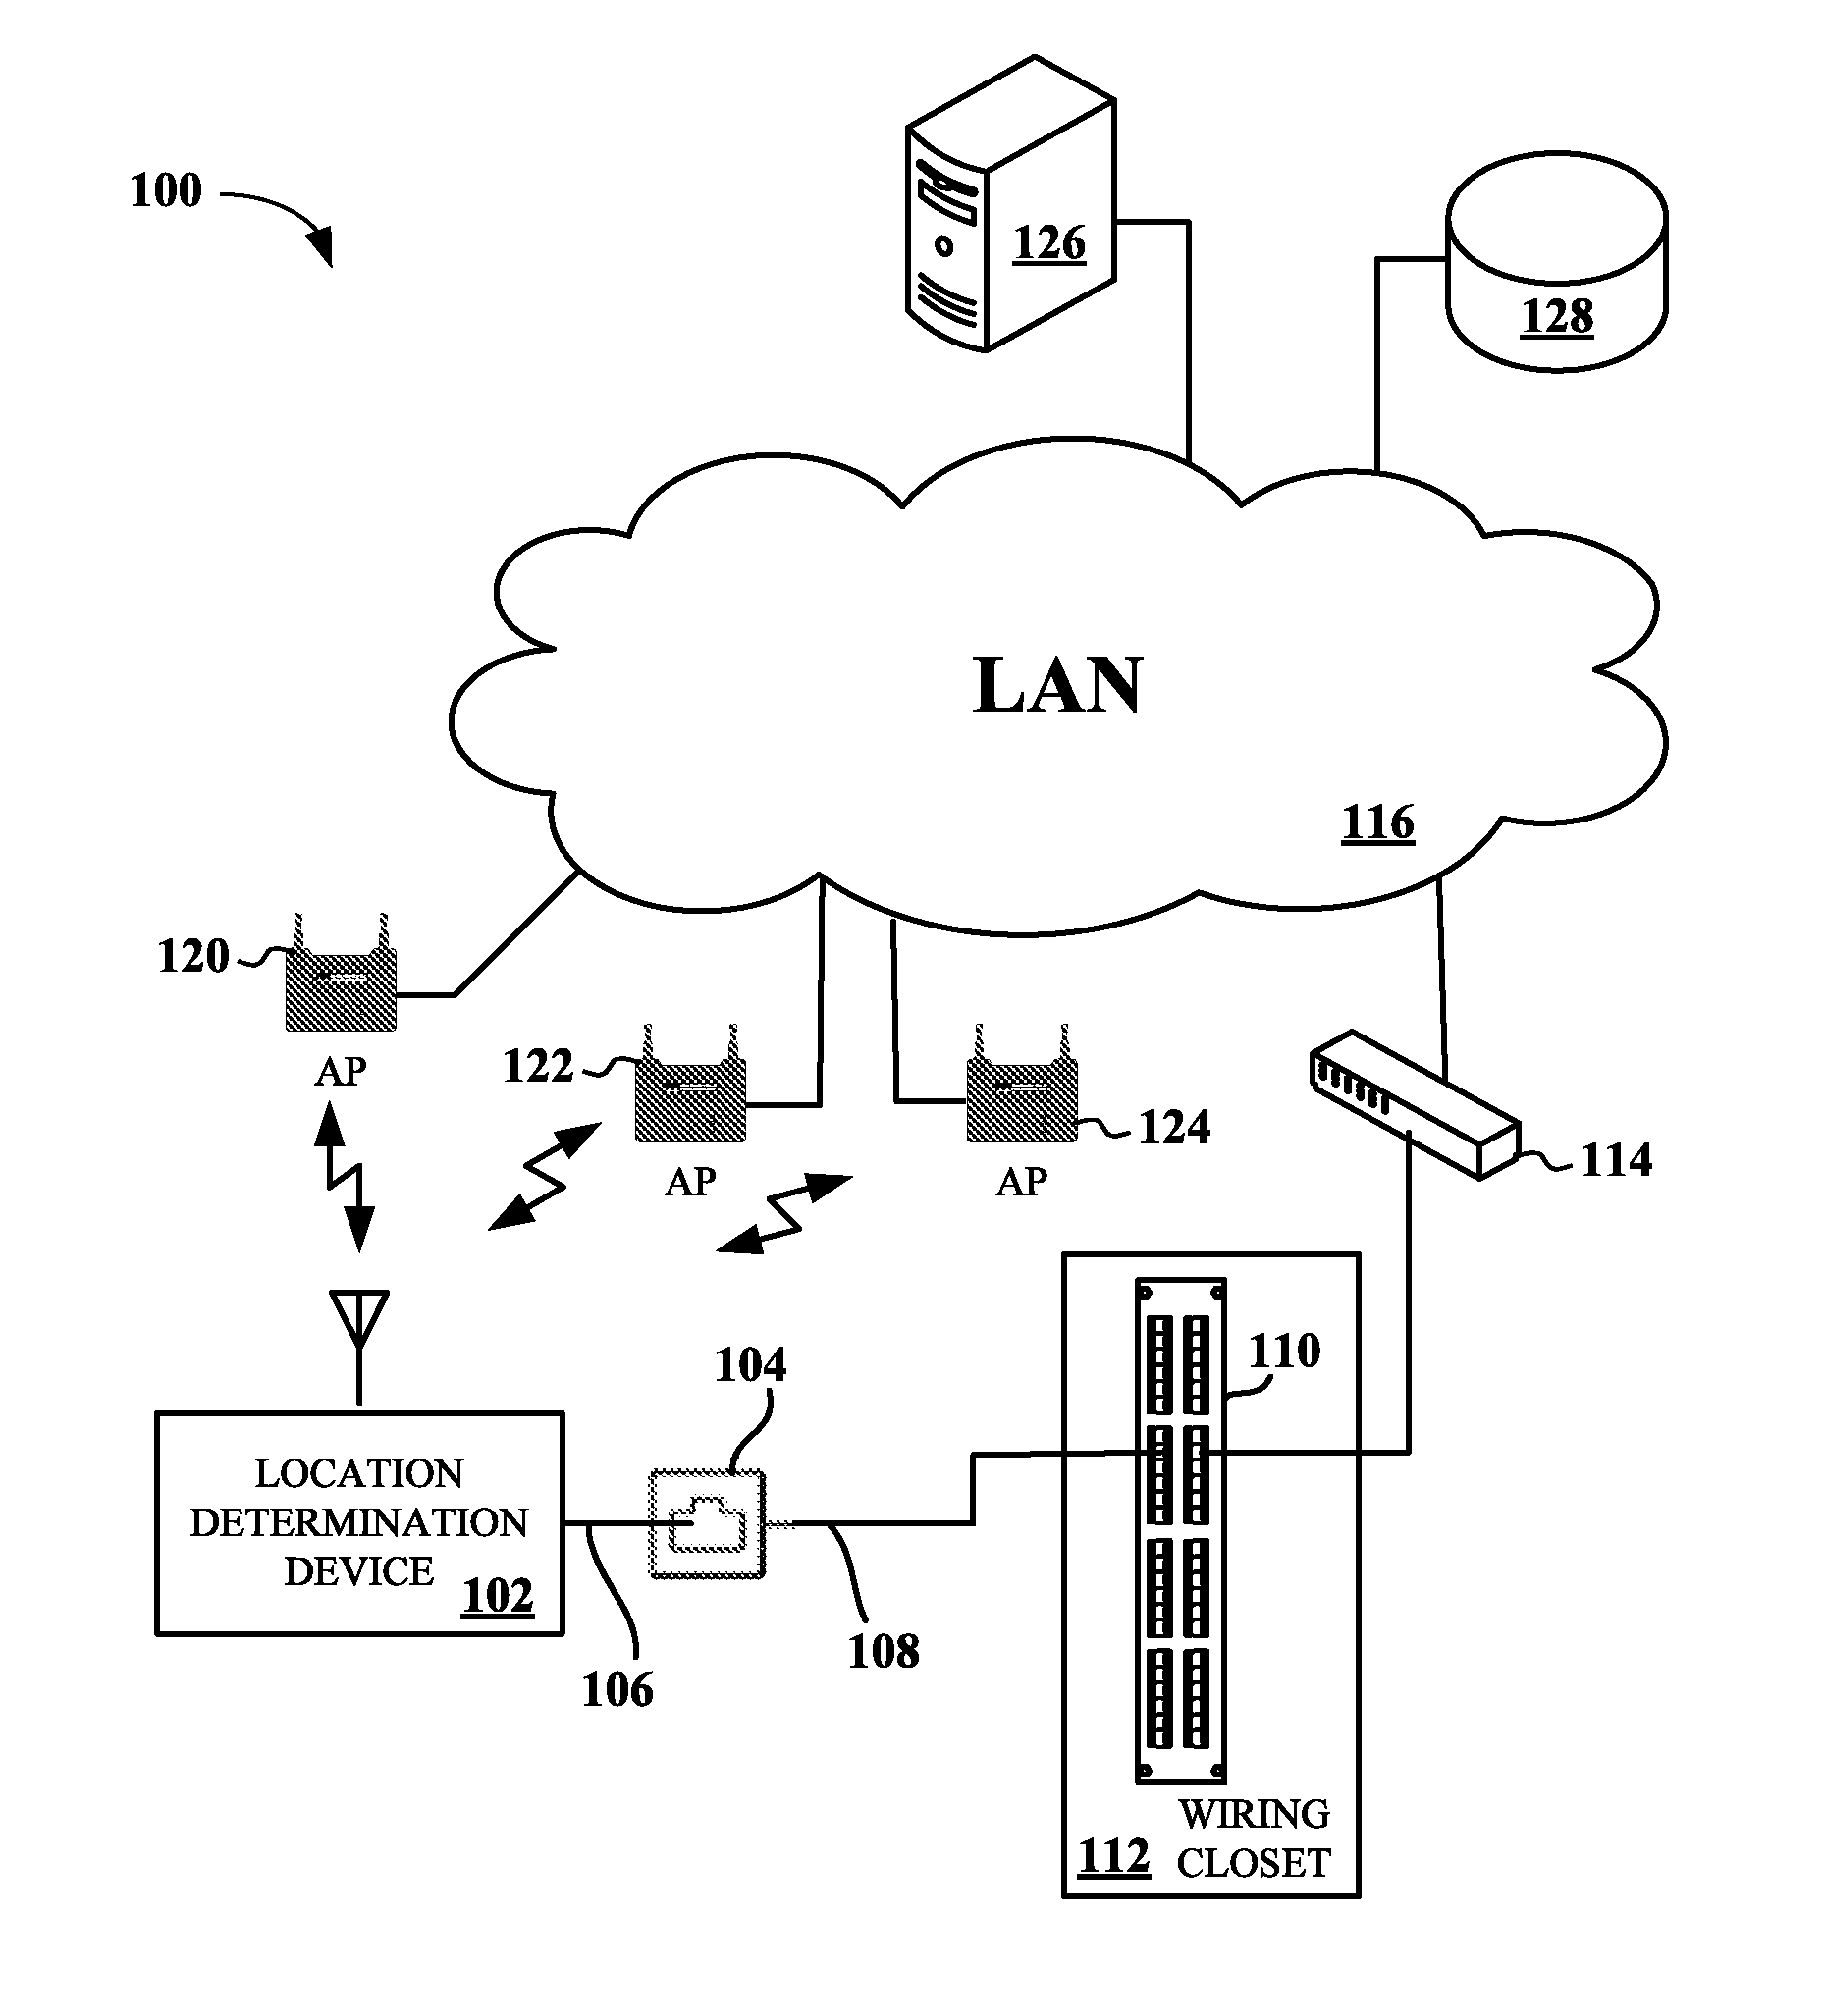 Obtaining per-port location information for wired LAN switches